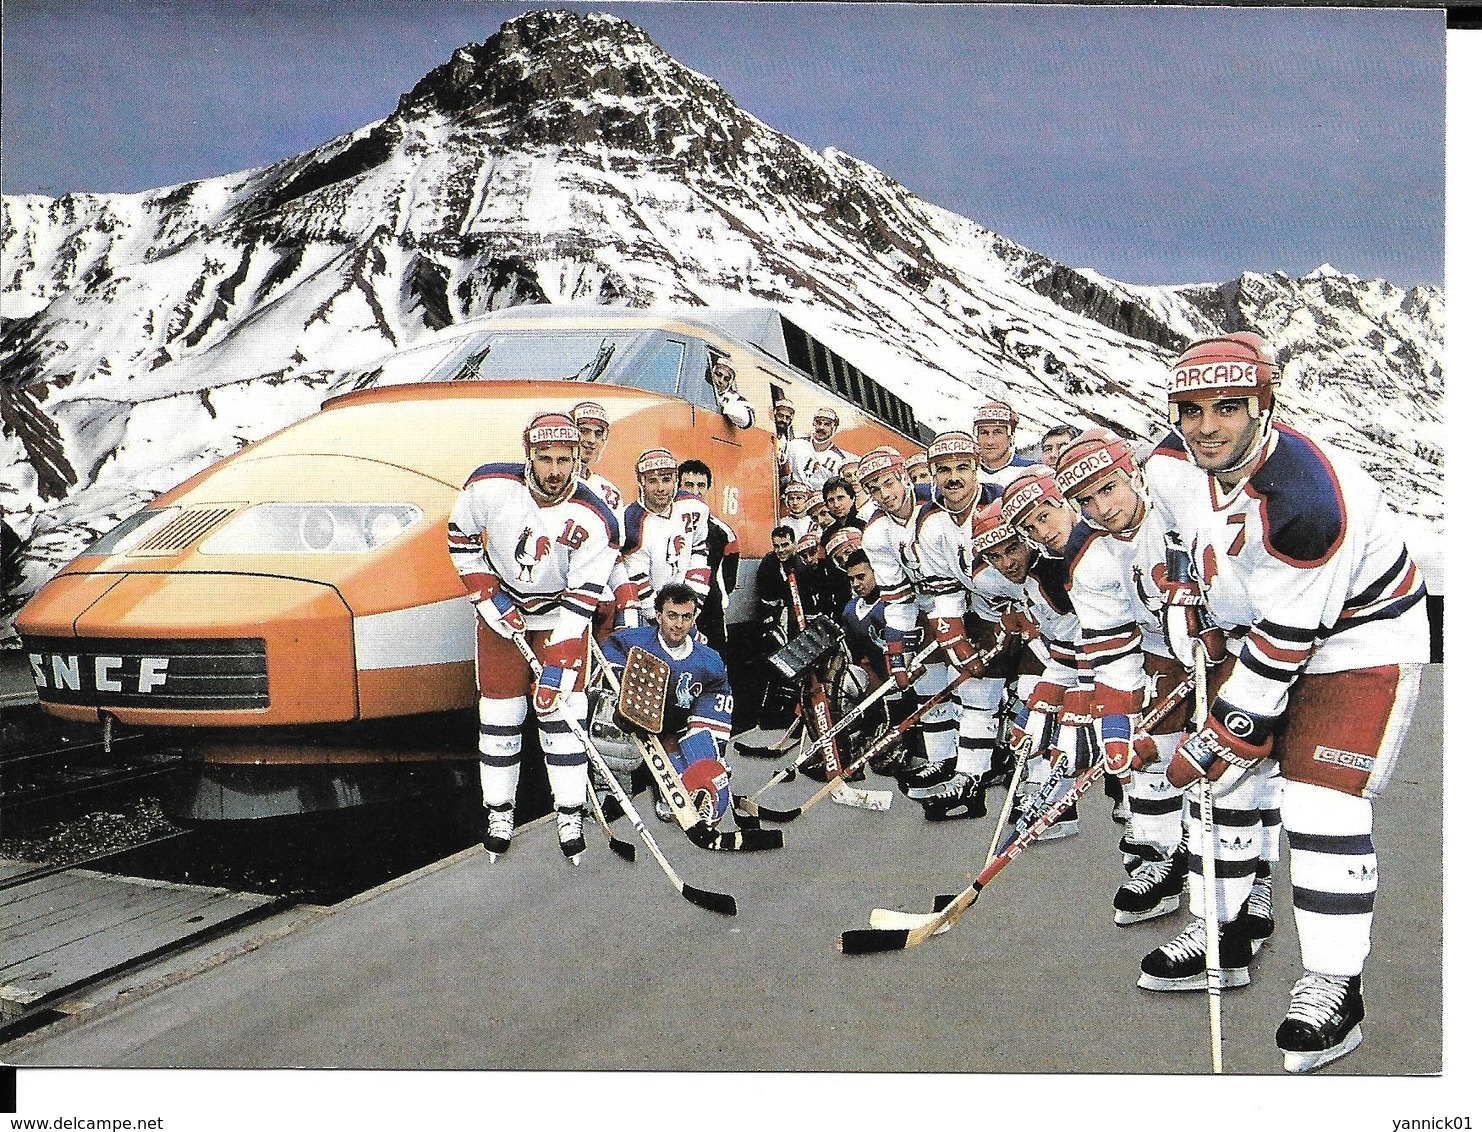 JEUX OLYMPIQUES HIVER - OLYMPICS WINTER GAMES - CALGARY 1988 - EQUIPE DE FRANCE HOCKEY SUR GLACE - Jeux Olympiques